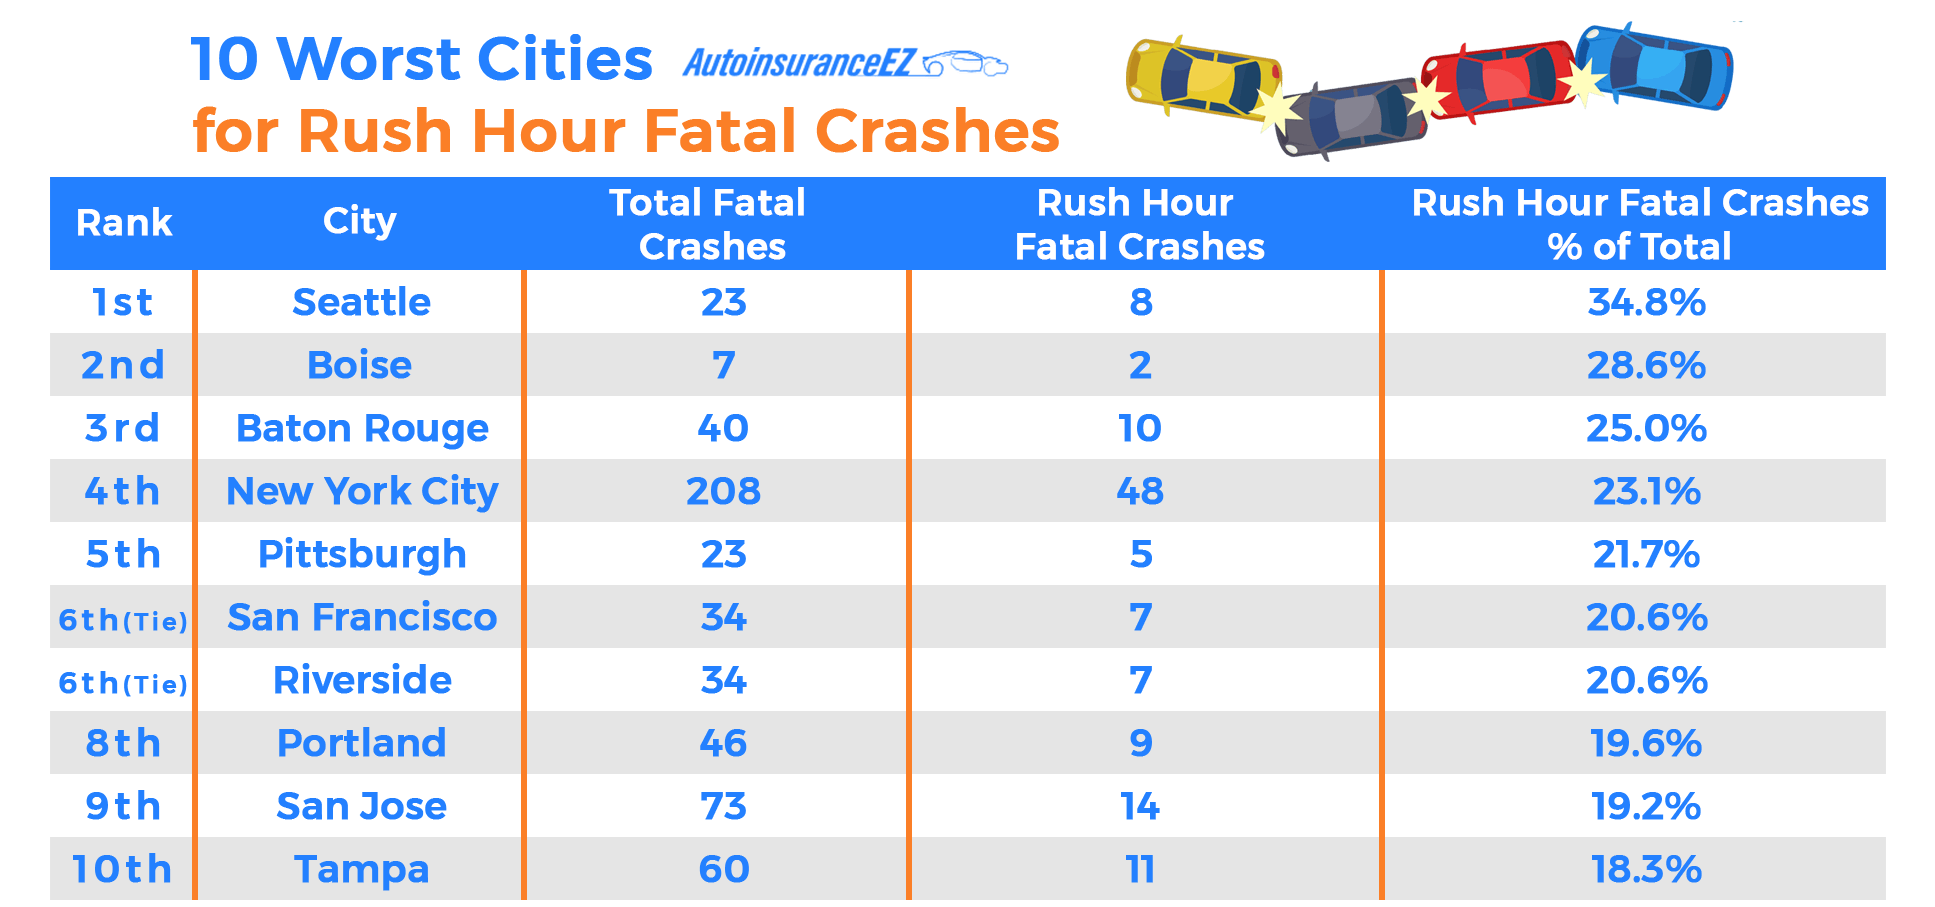 10 Worst Cities for Rush Hour Fatal Crashes